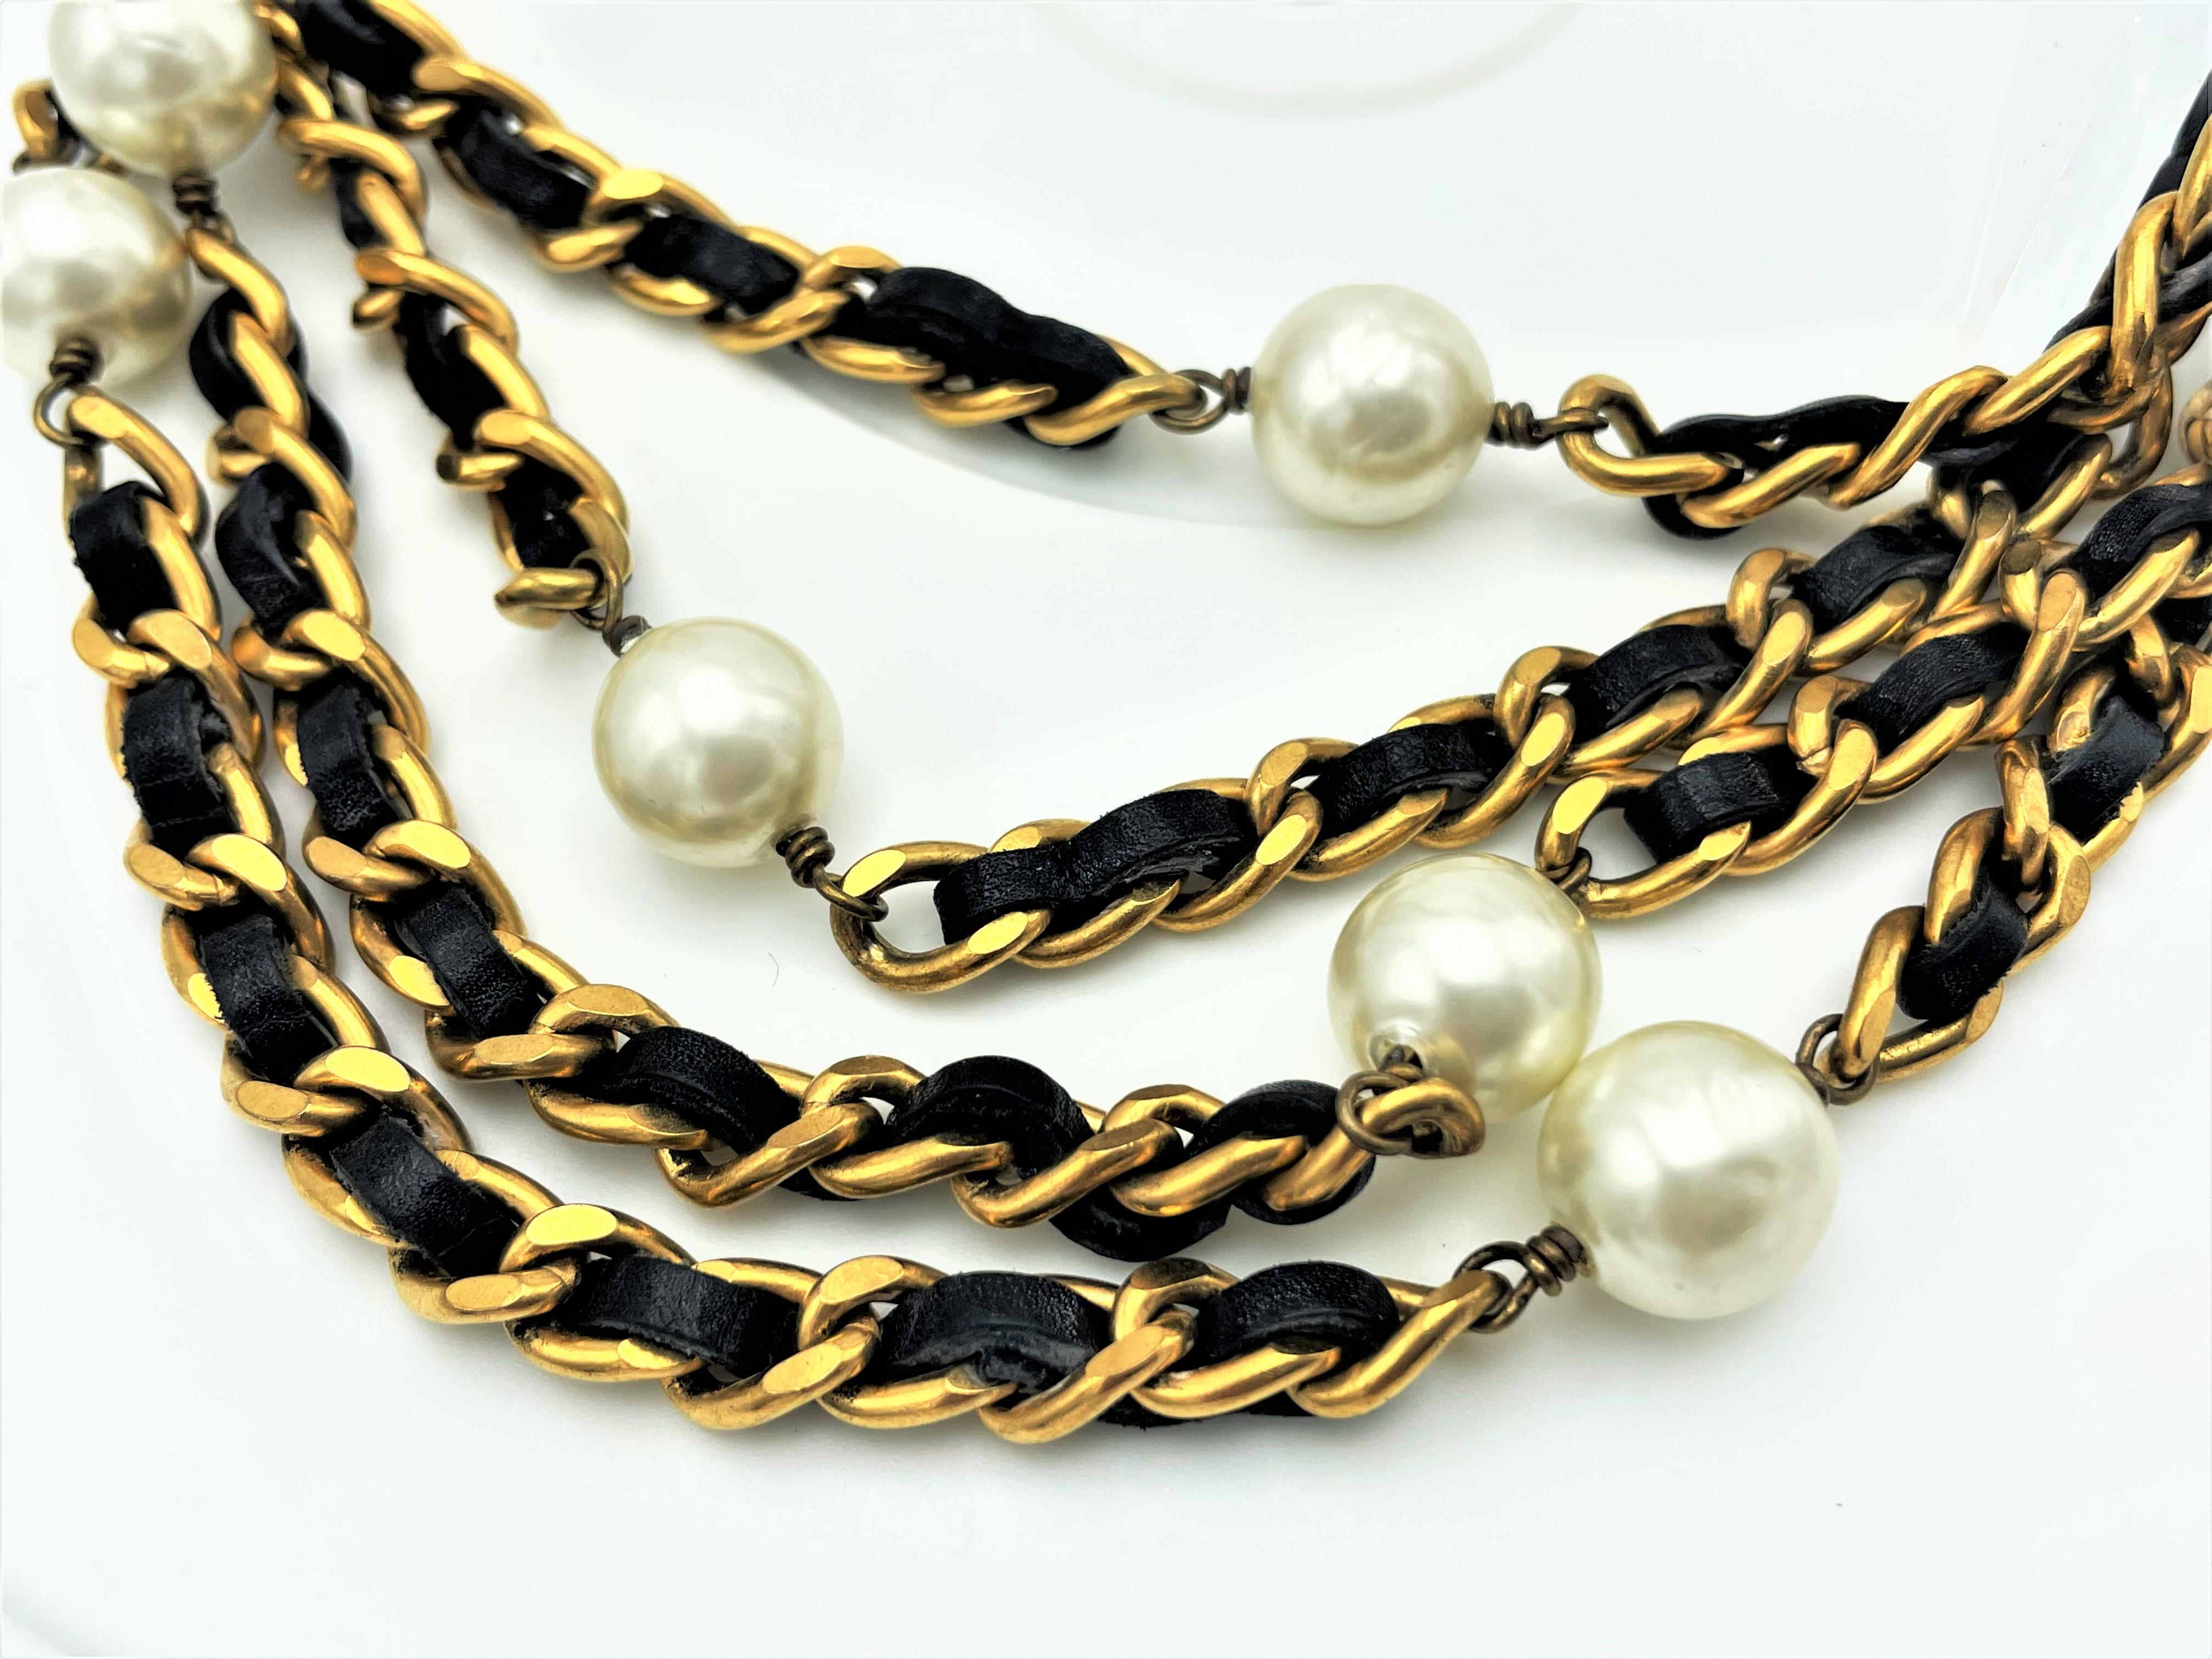 Iconic Chanel chain with leather woven throughout and Chanel pearls, 1990s 1